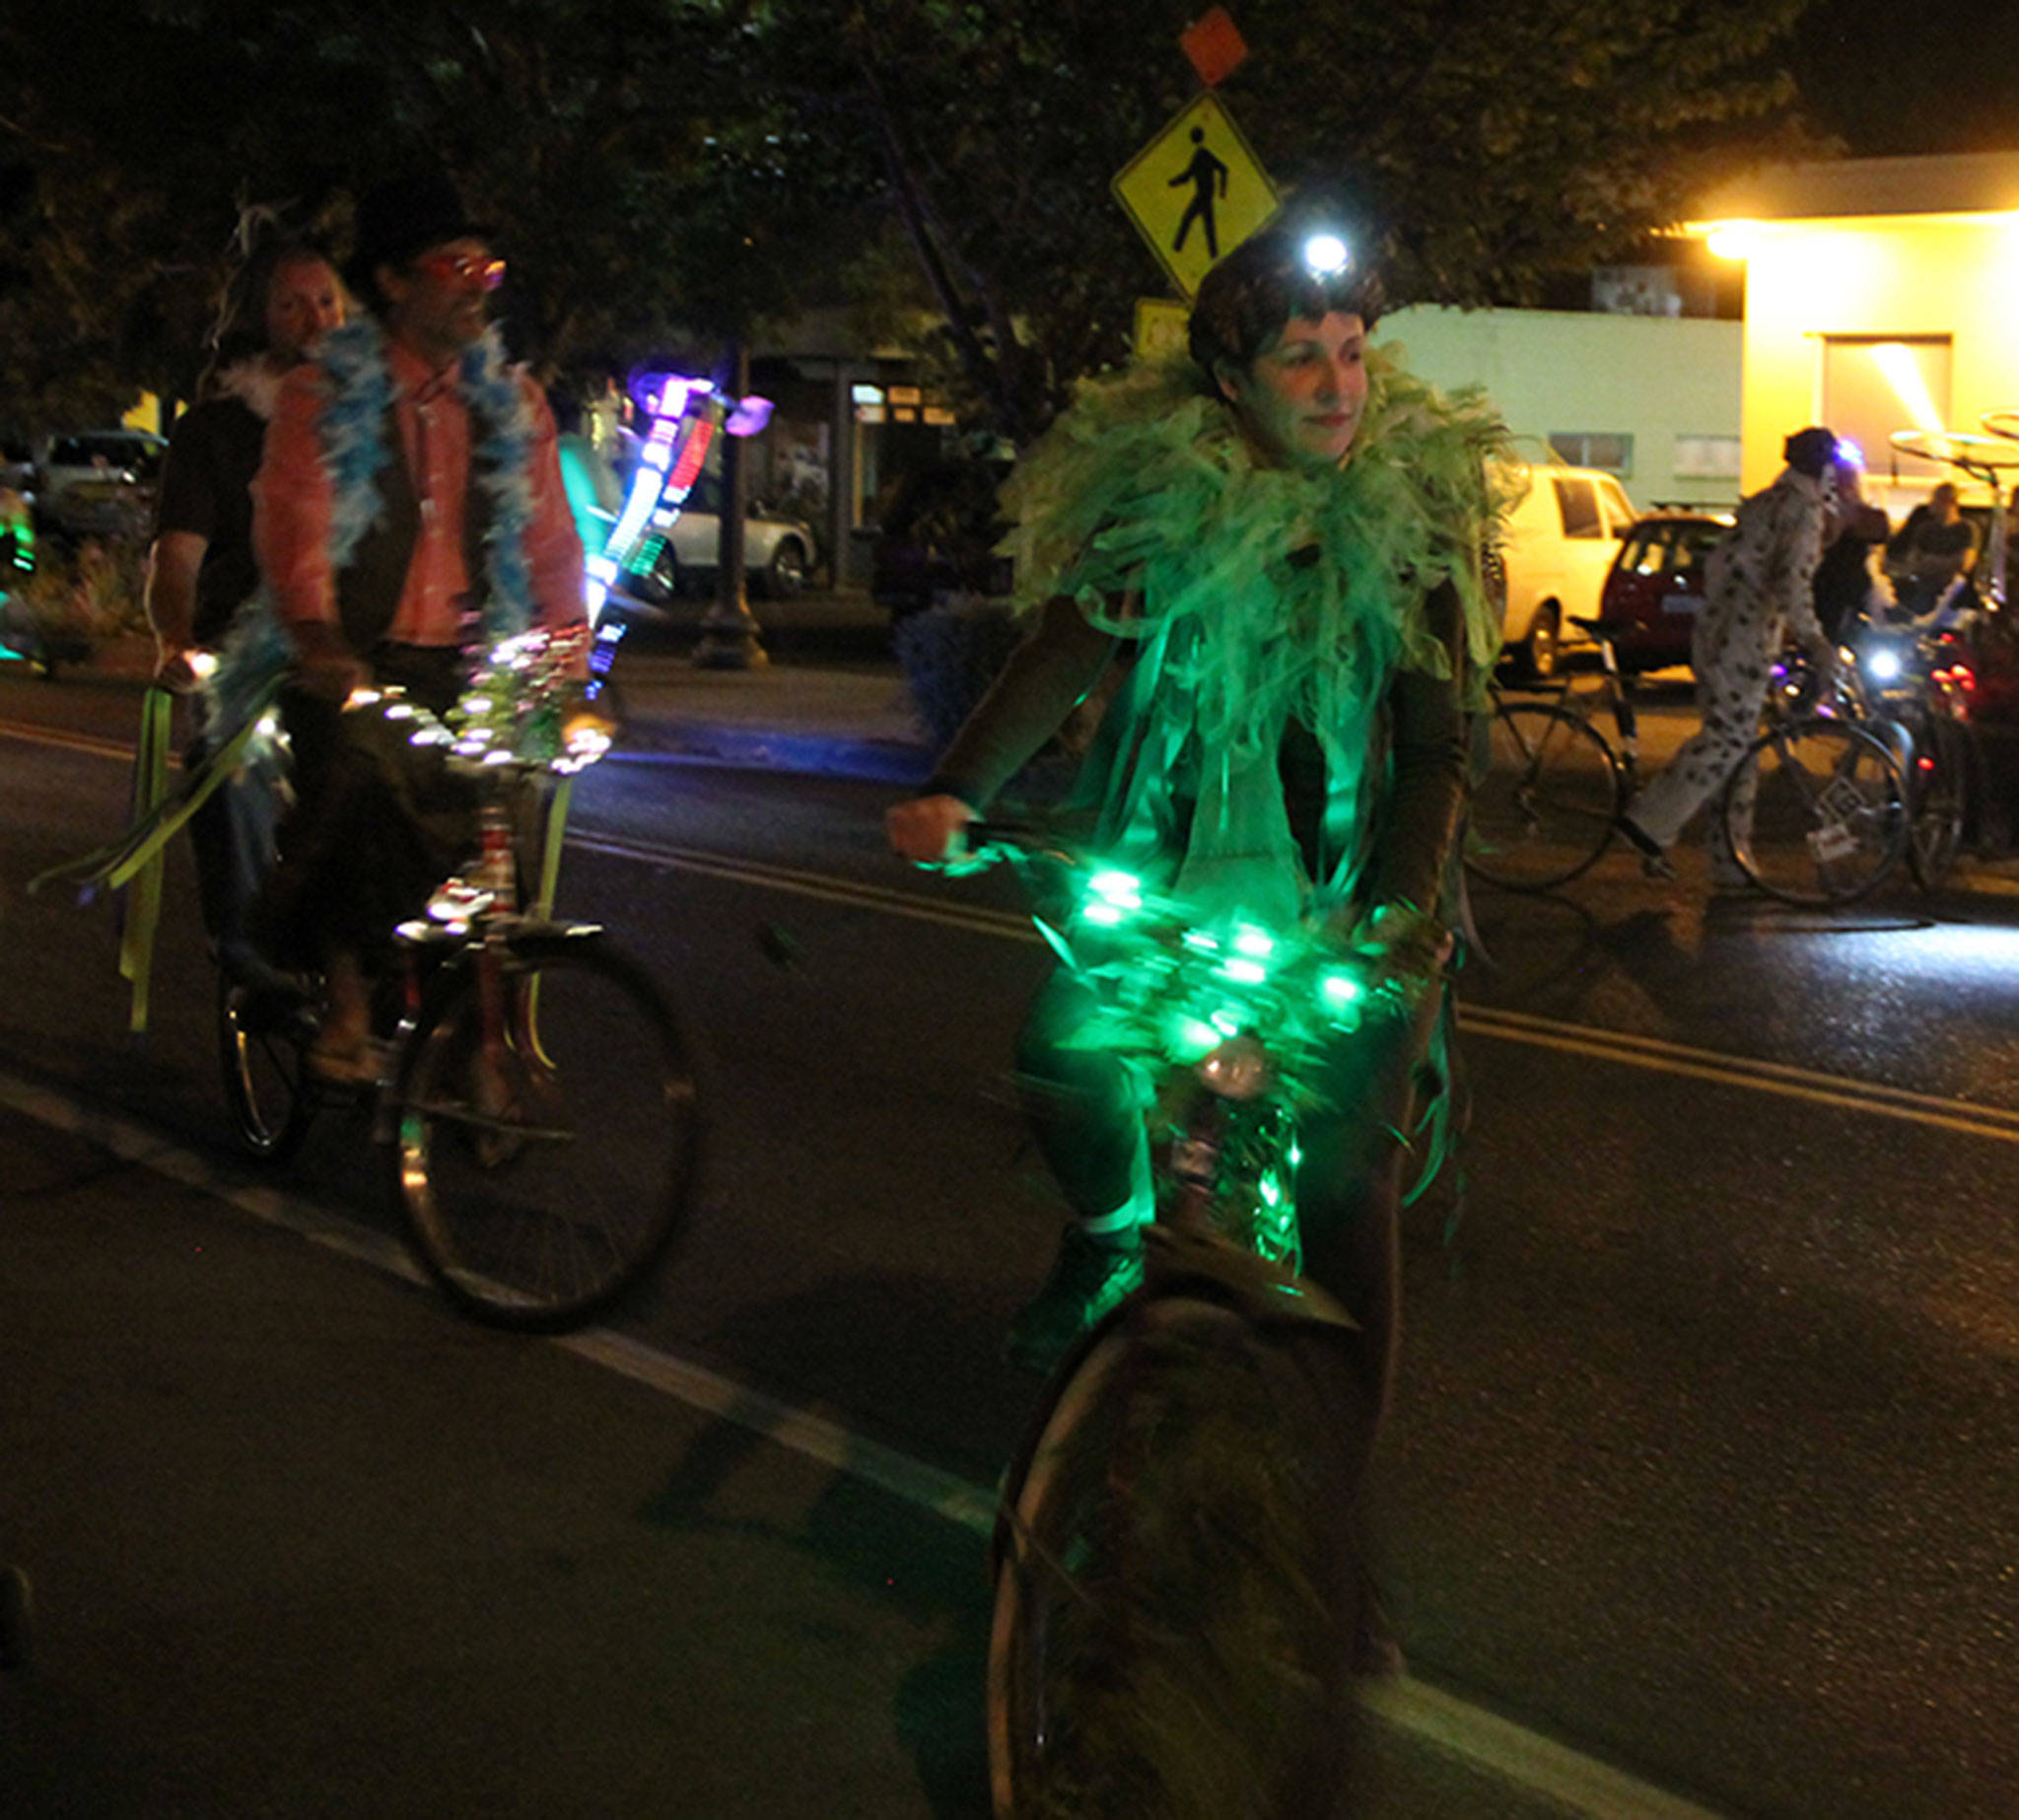 A woman rides a lit-up bike decked out in a green costume. (Susan Riemer/Staff Photo)